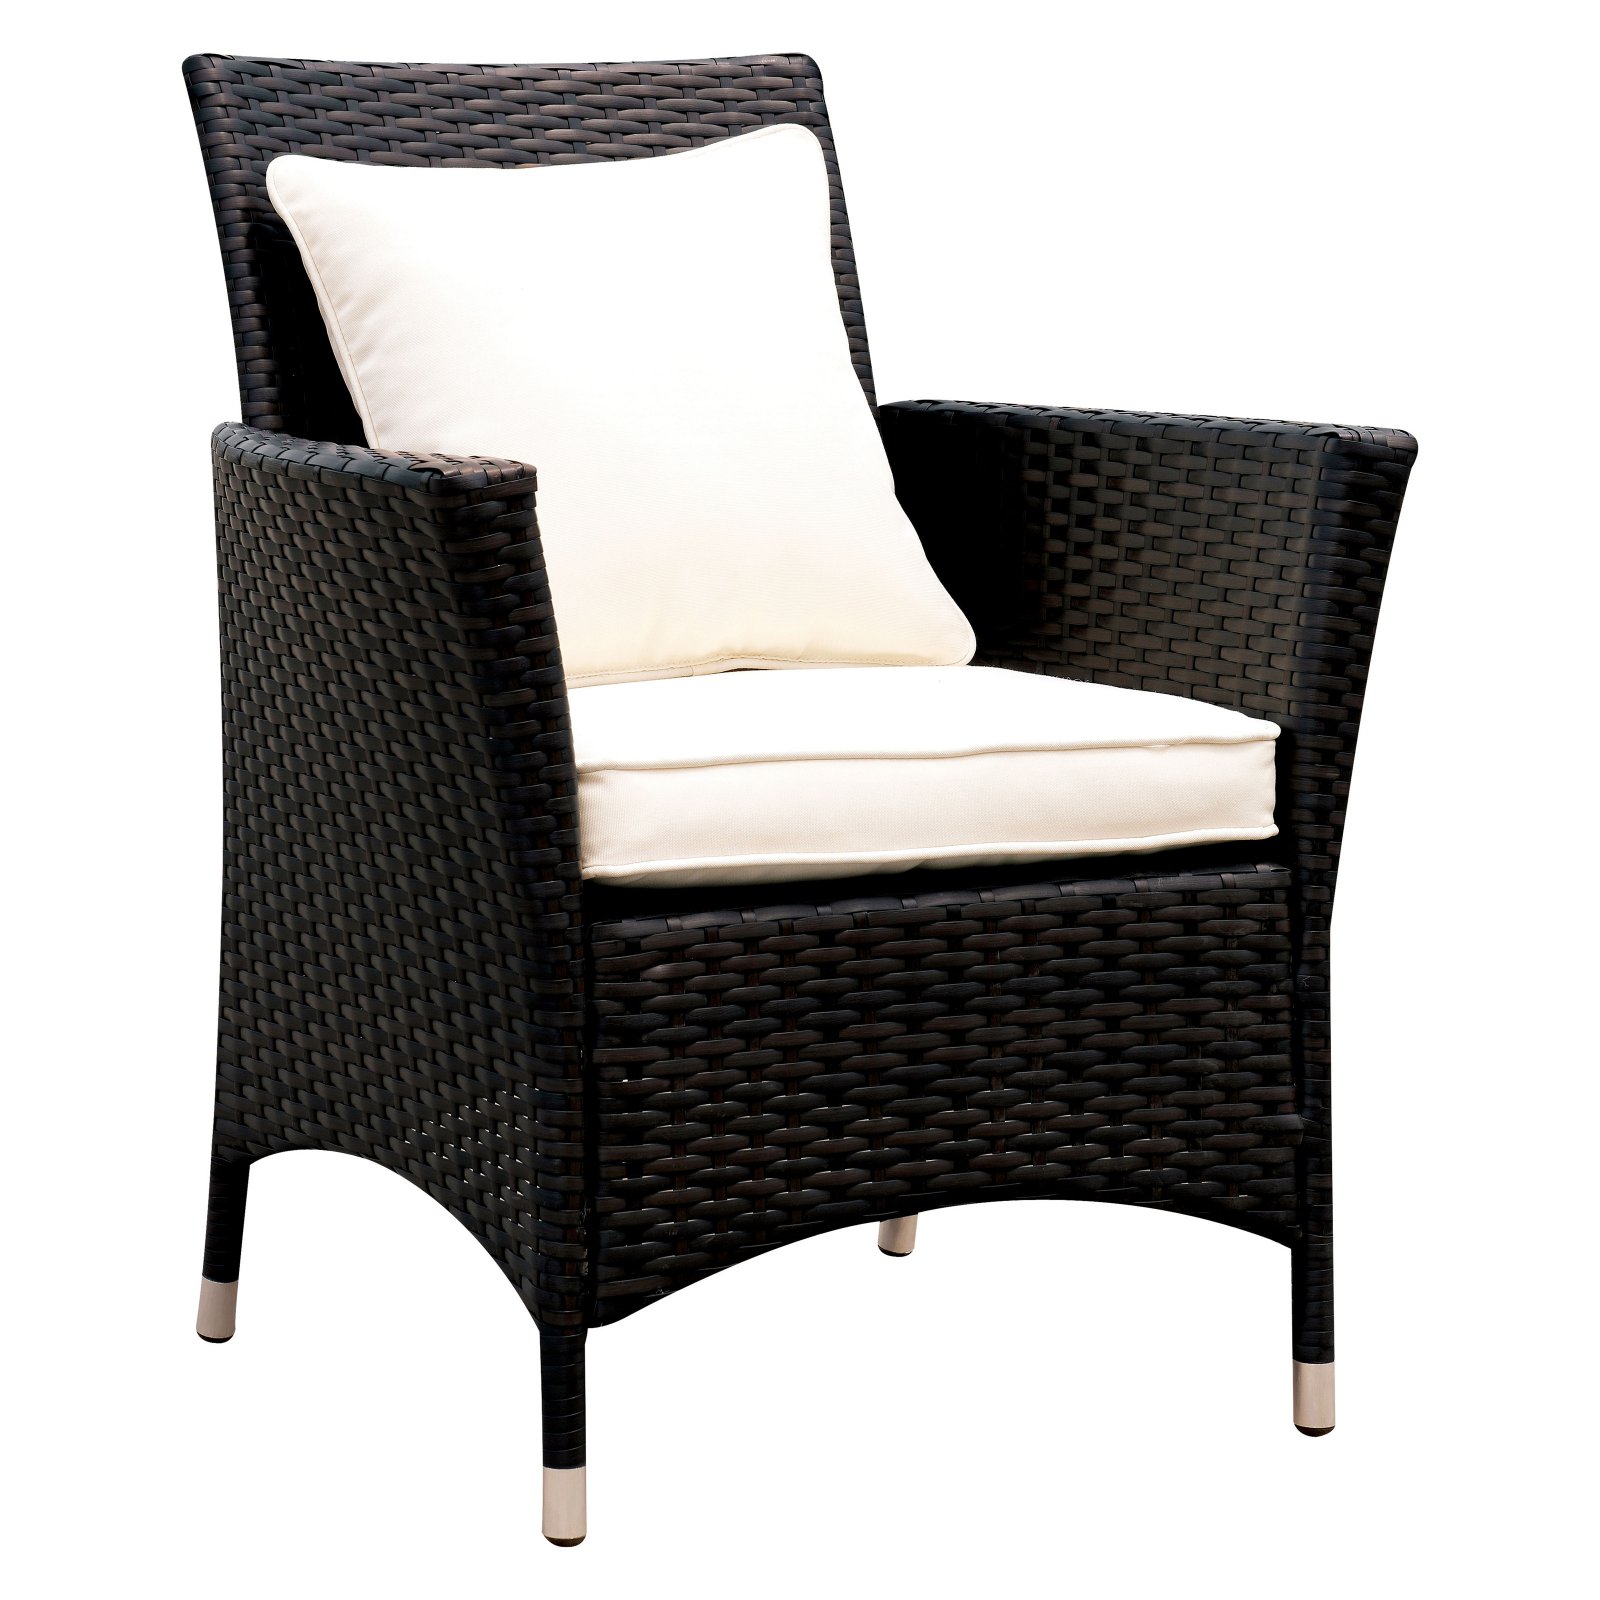 Furniture of America Karrot Contemporary Outdoor Dining Arm Chair - image 4 of 7